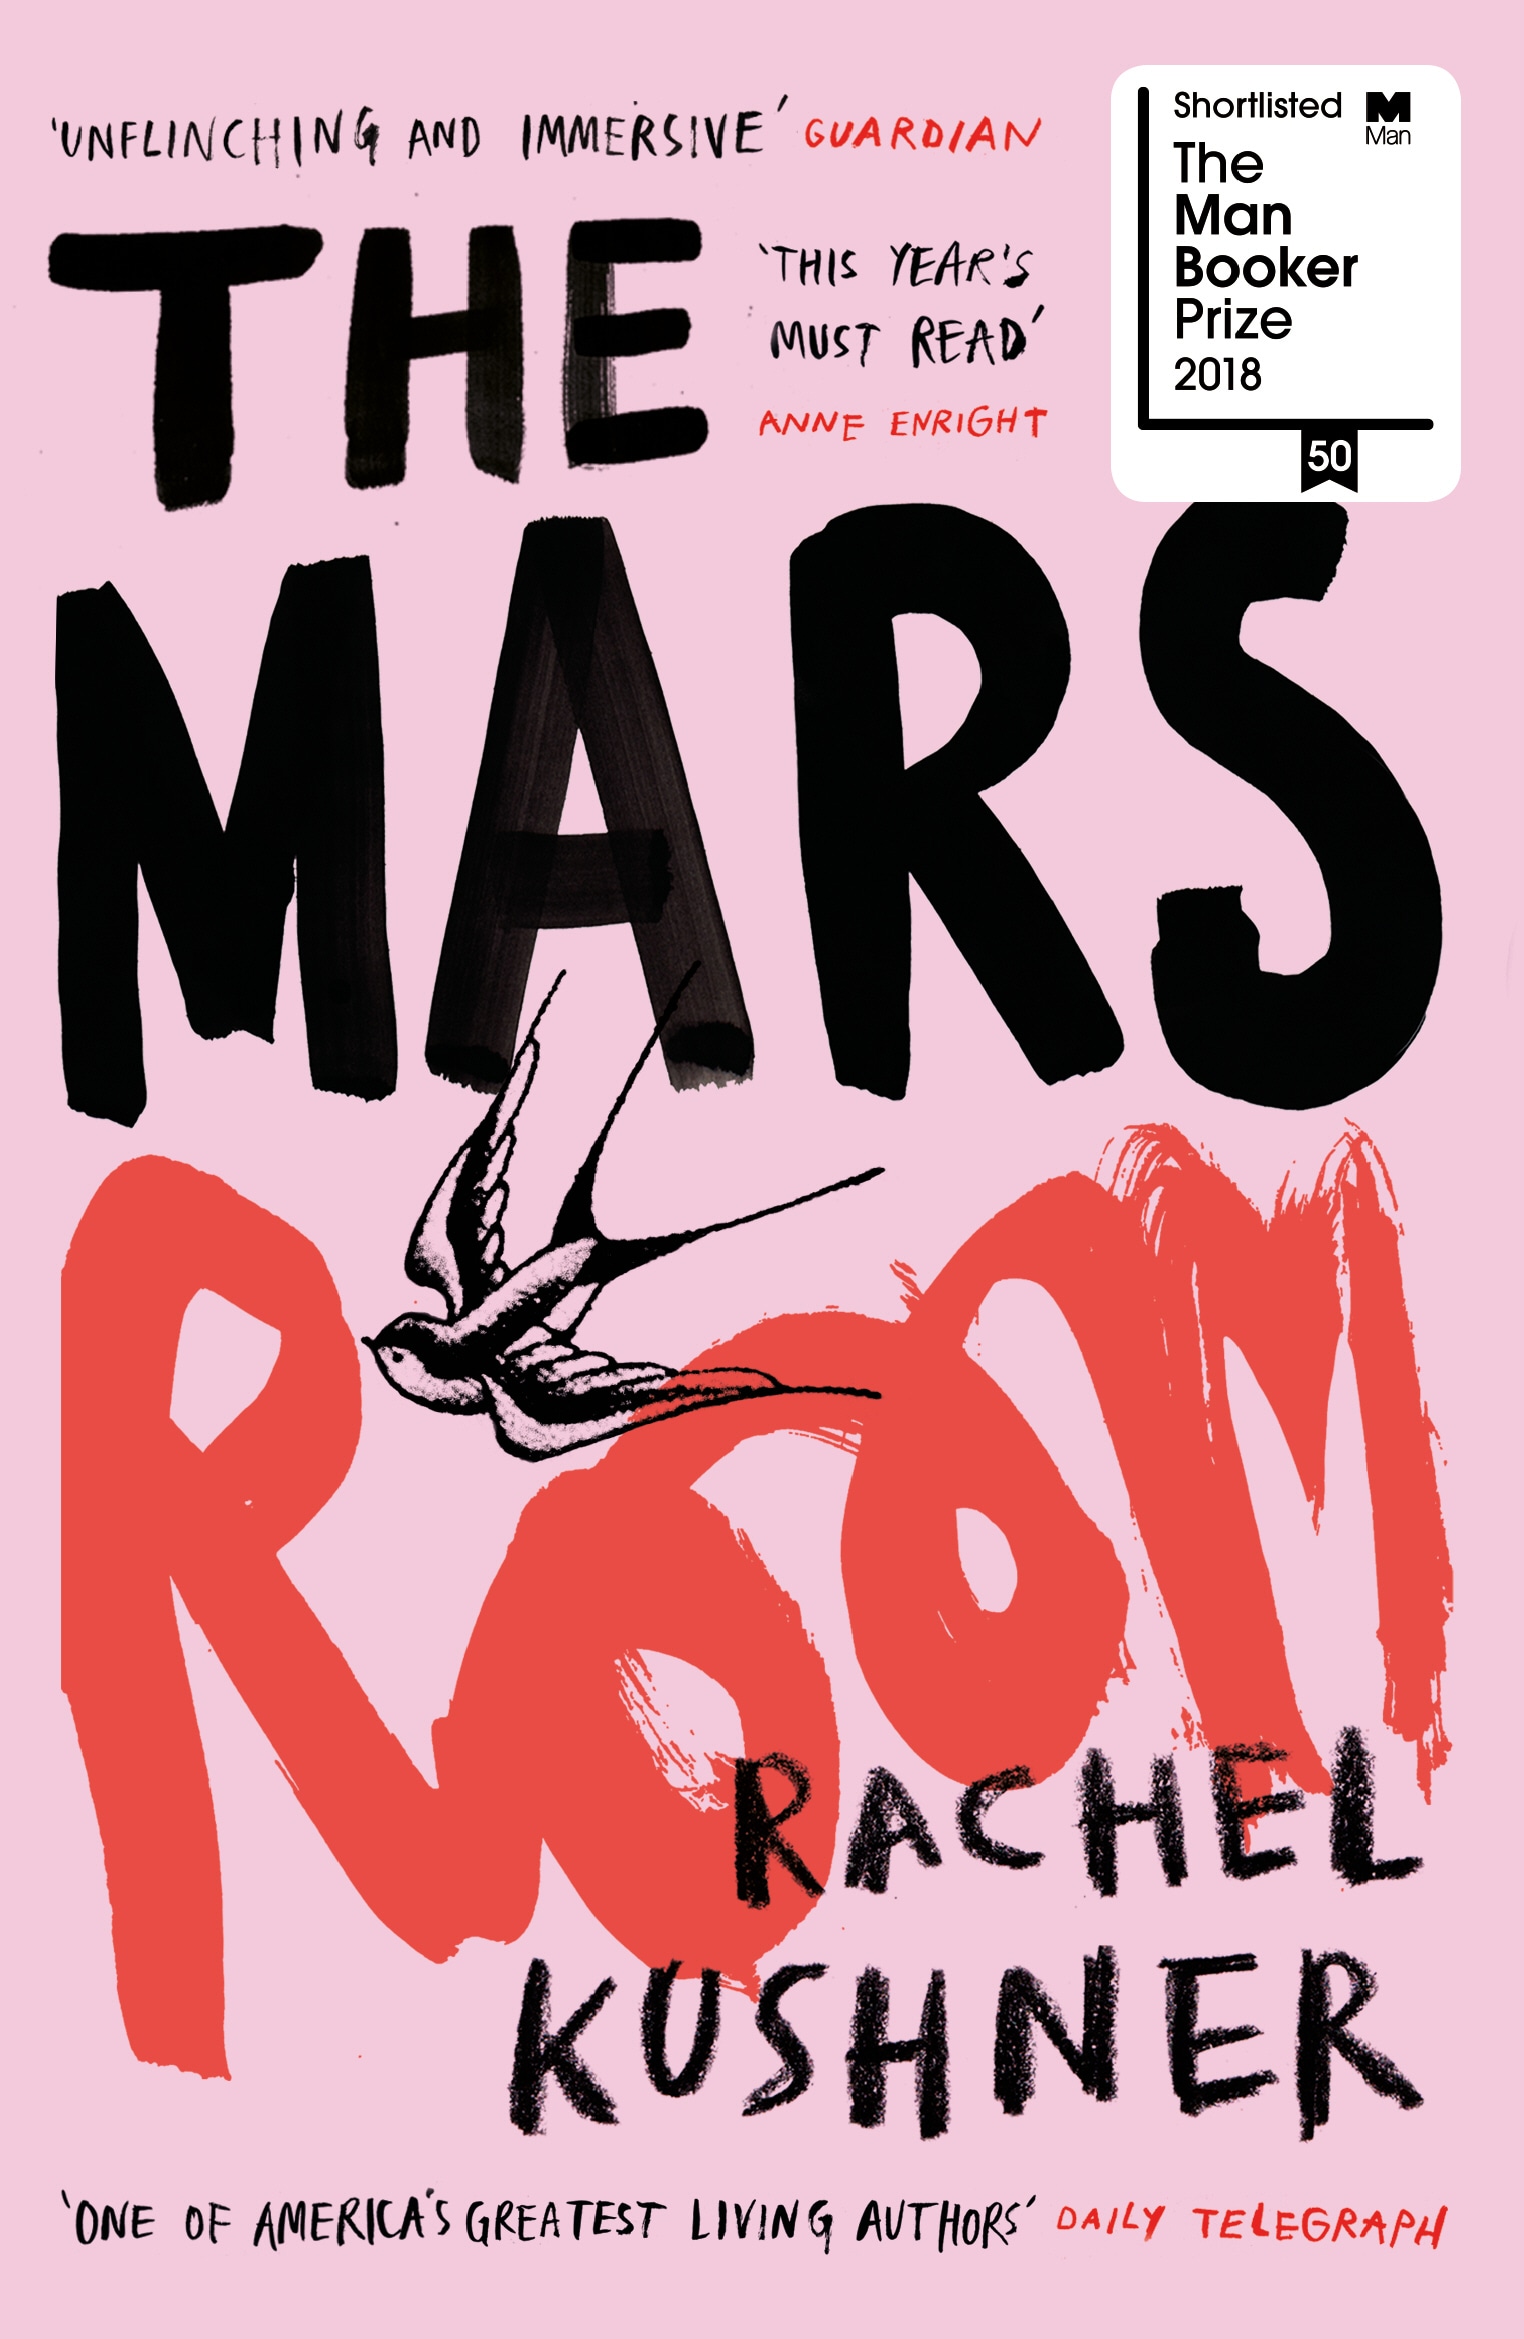 Book “The Mars Room” by Rachel Kushner — March 7, 2019